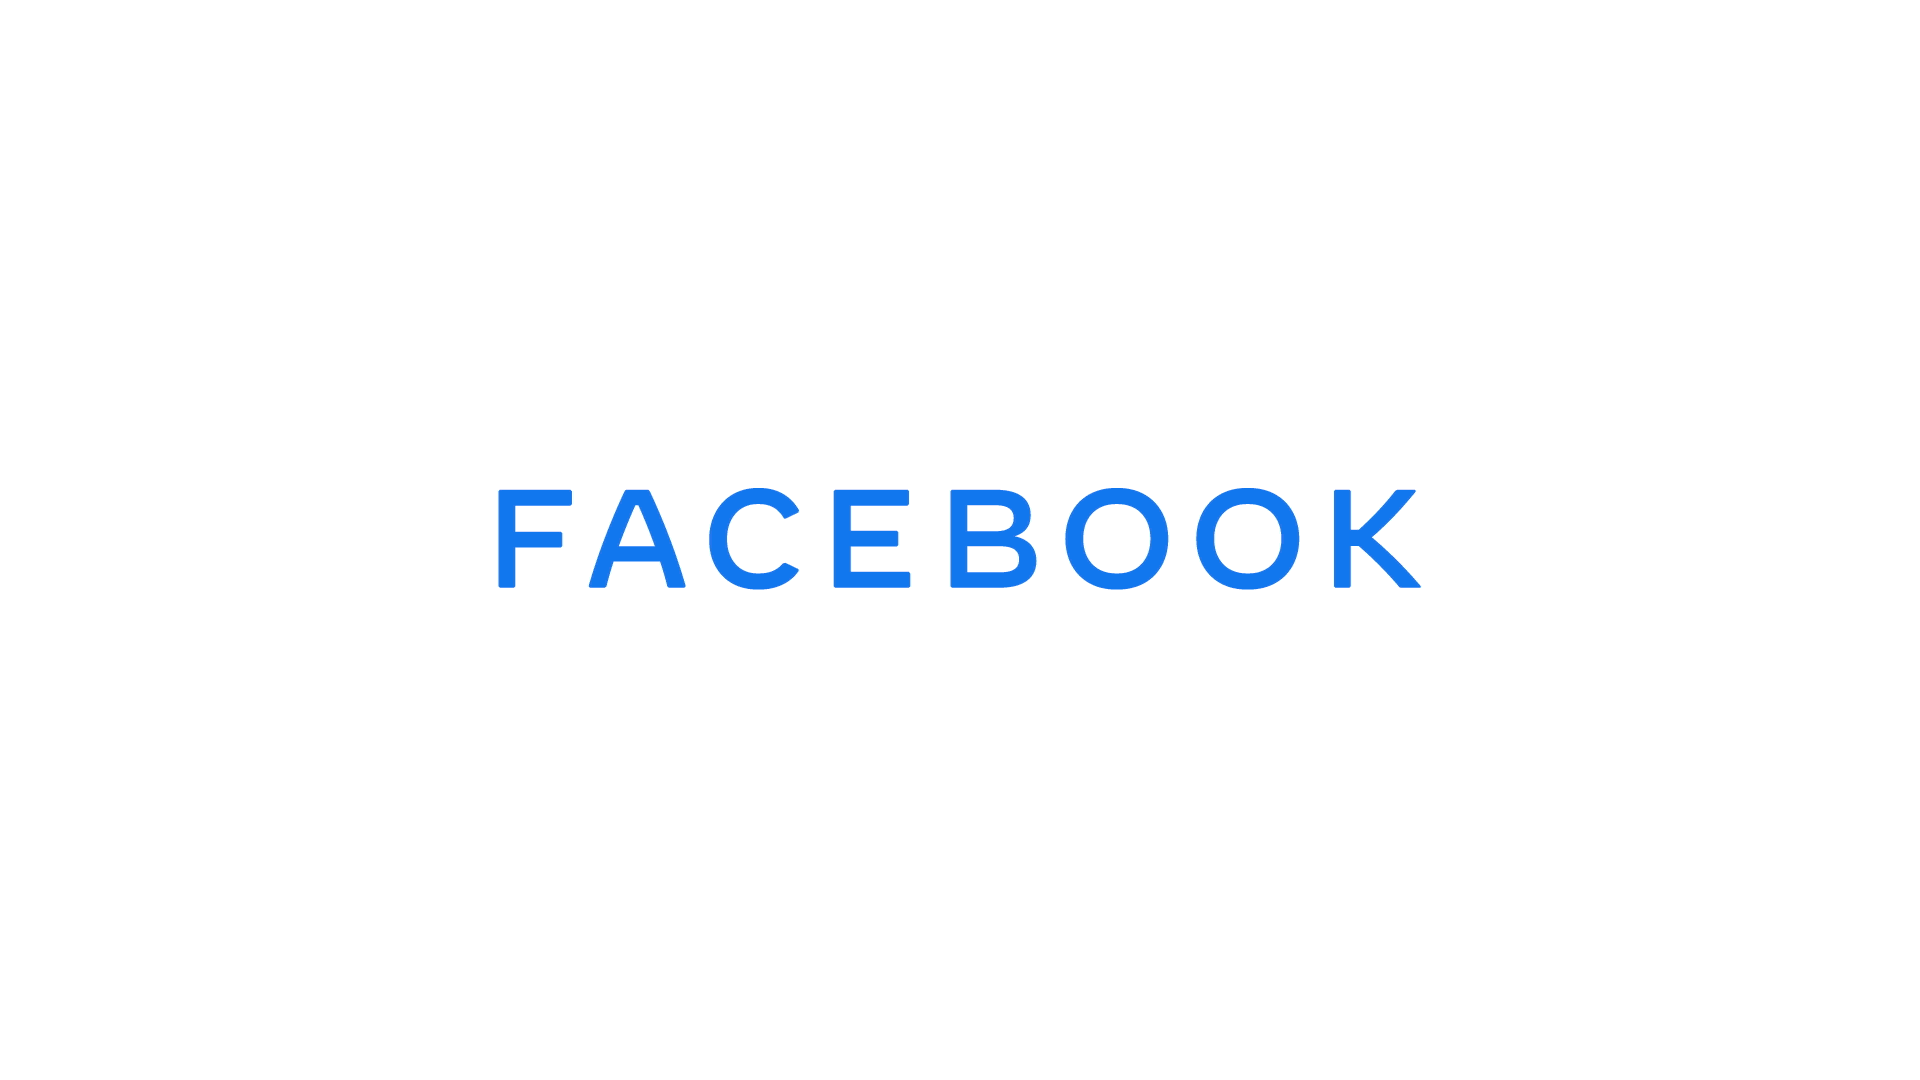 Facebook unique logo changes to brand its all products 